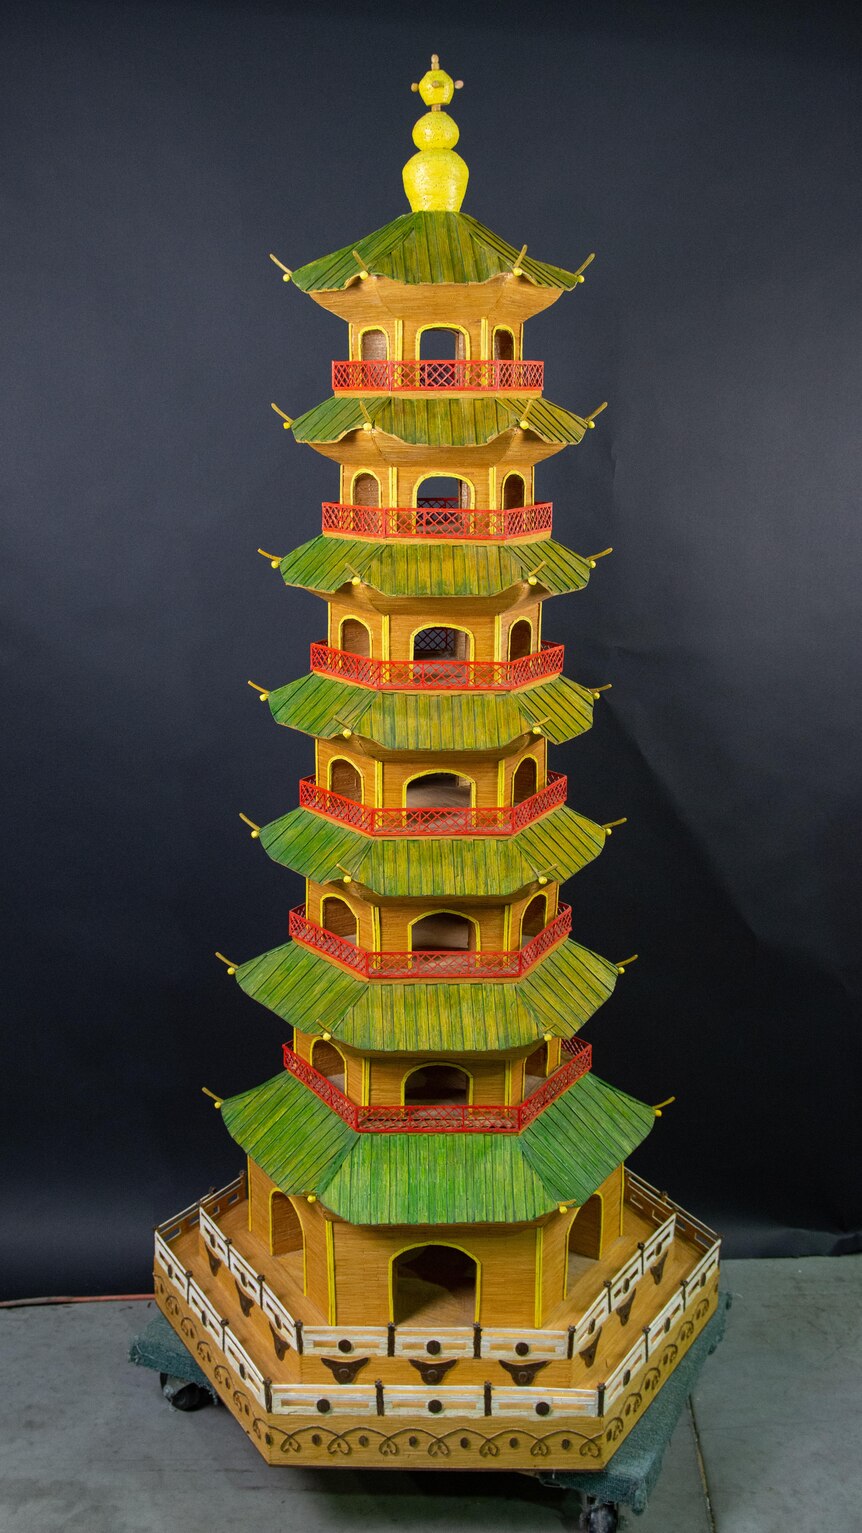 A model of a tall Chinese pagoda built made of matchsticks.